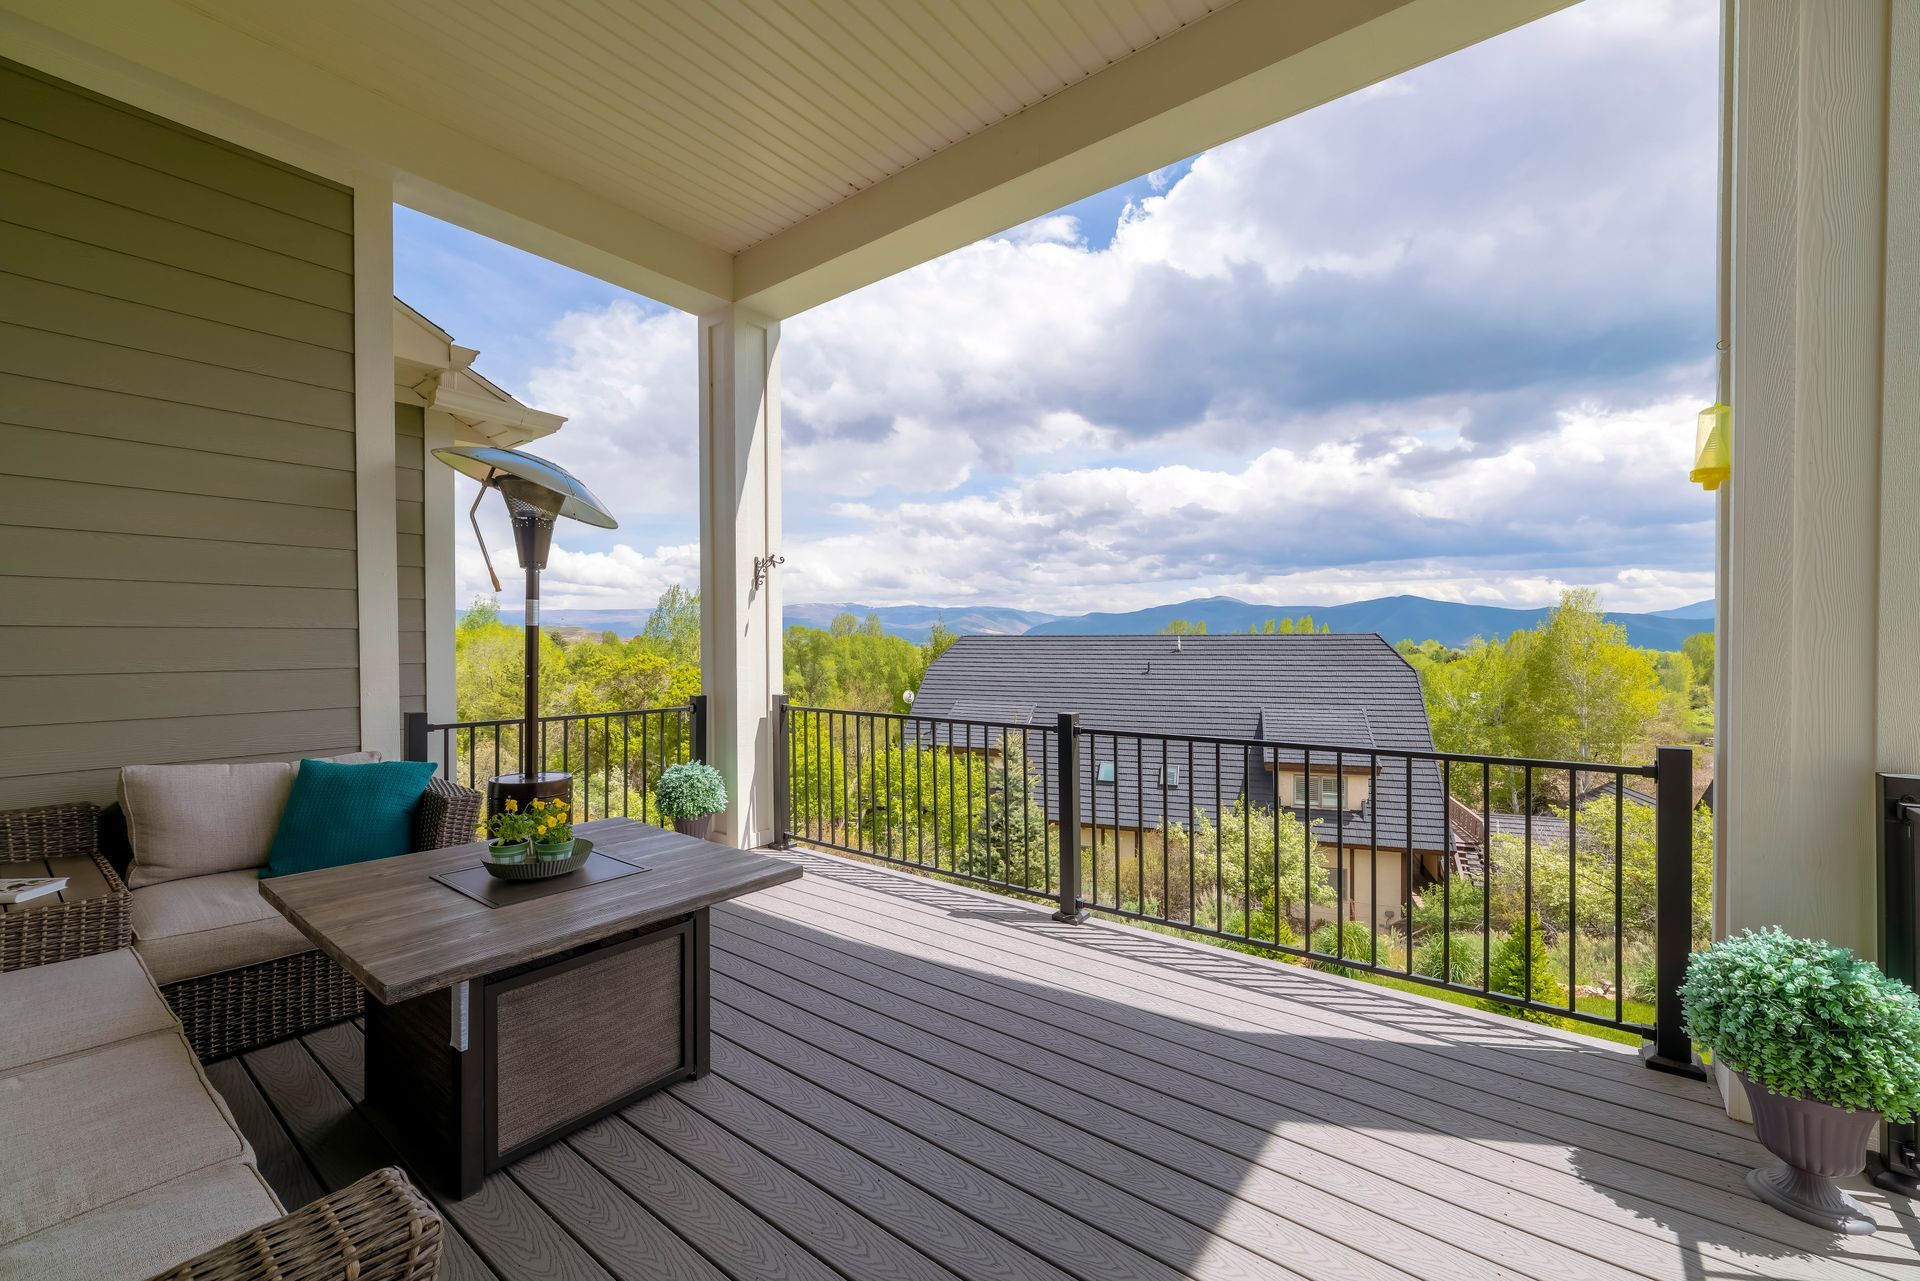 there is a large porch with a view of the mountains .